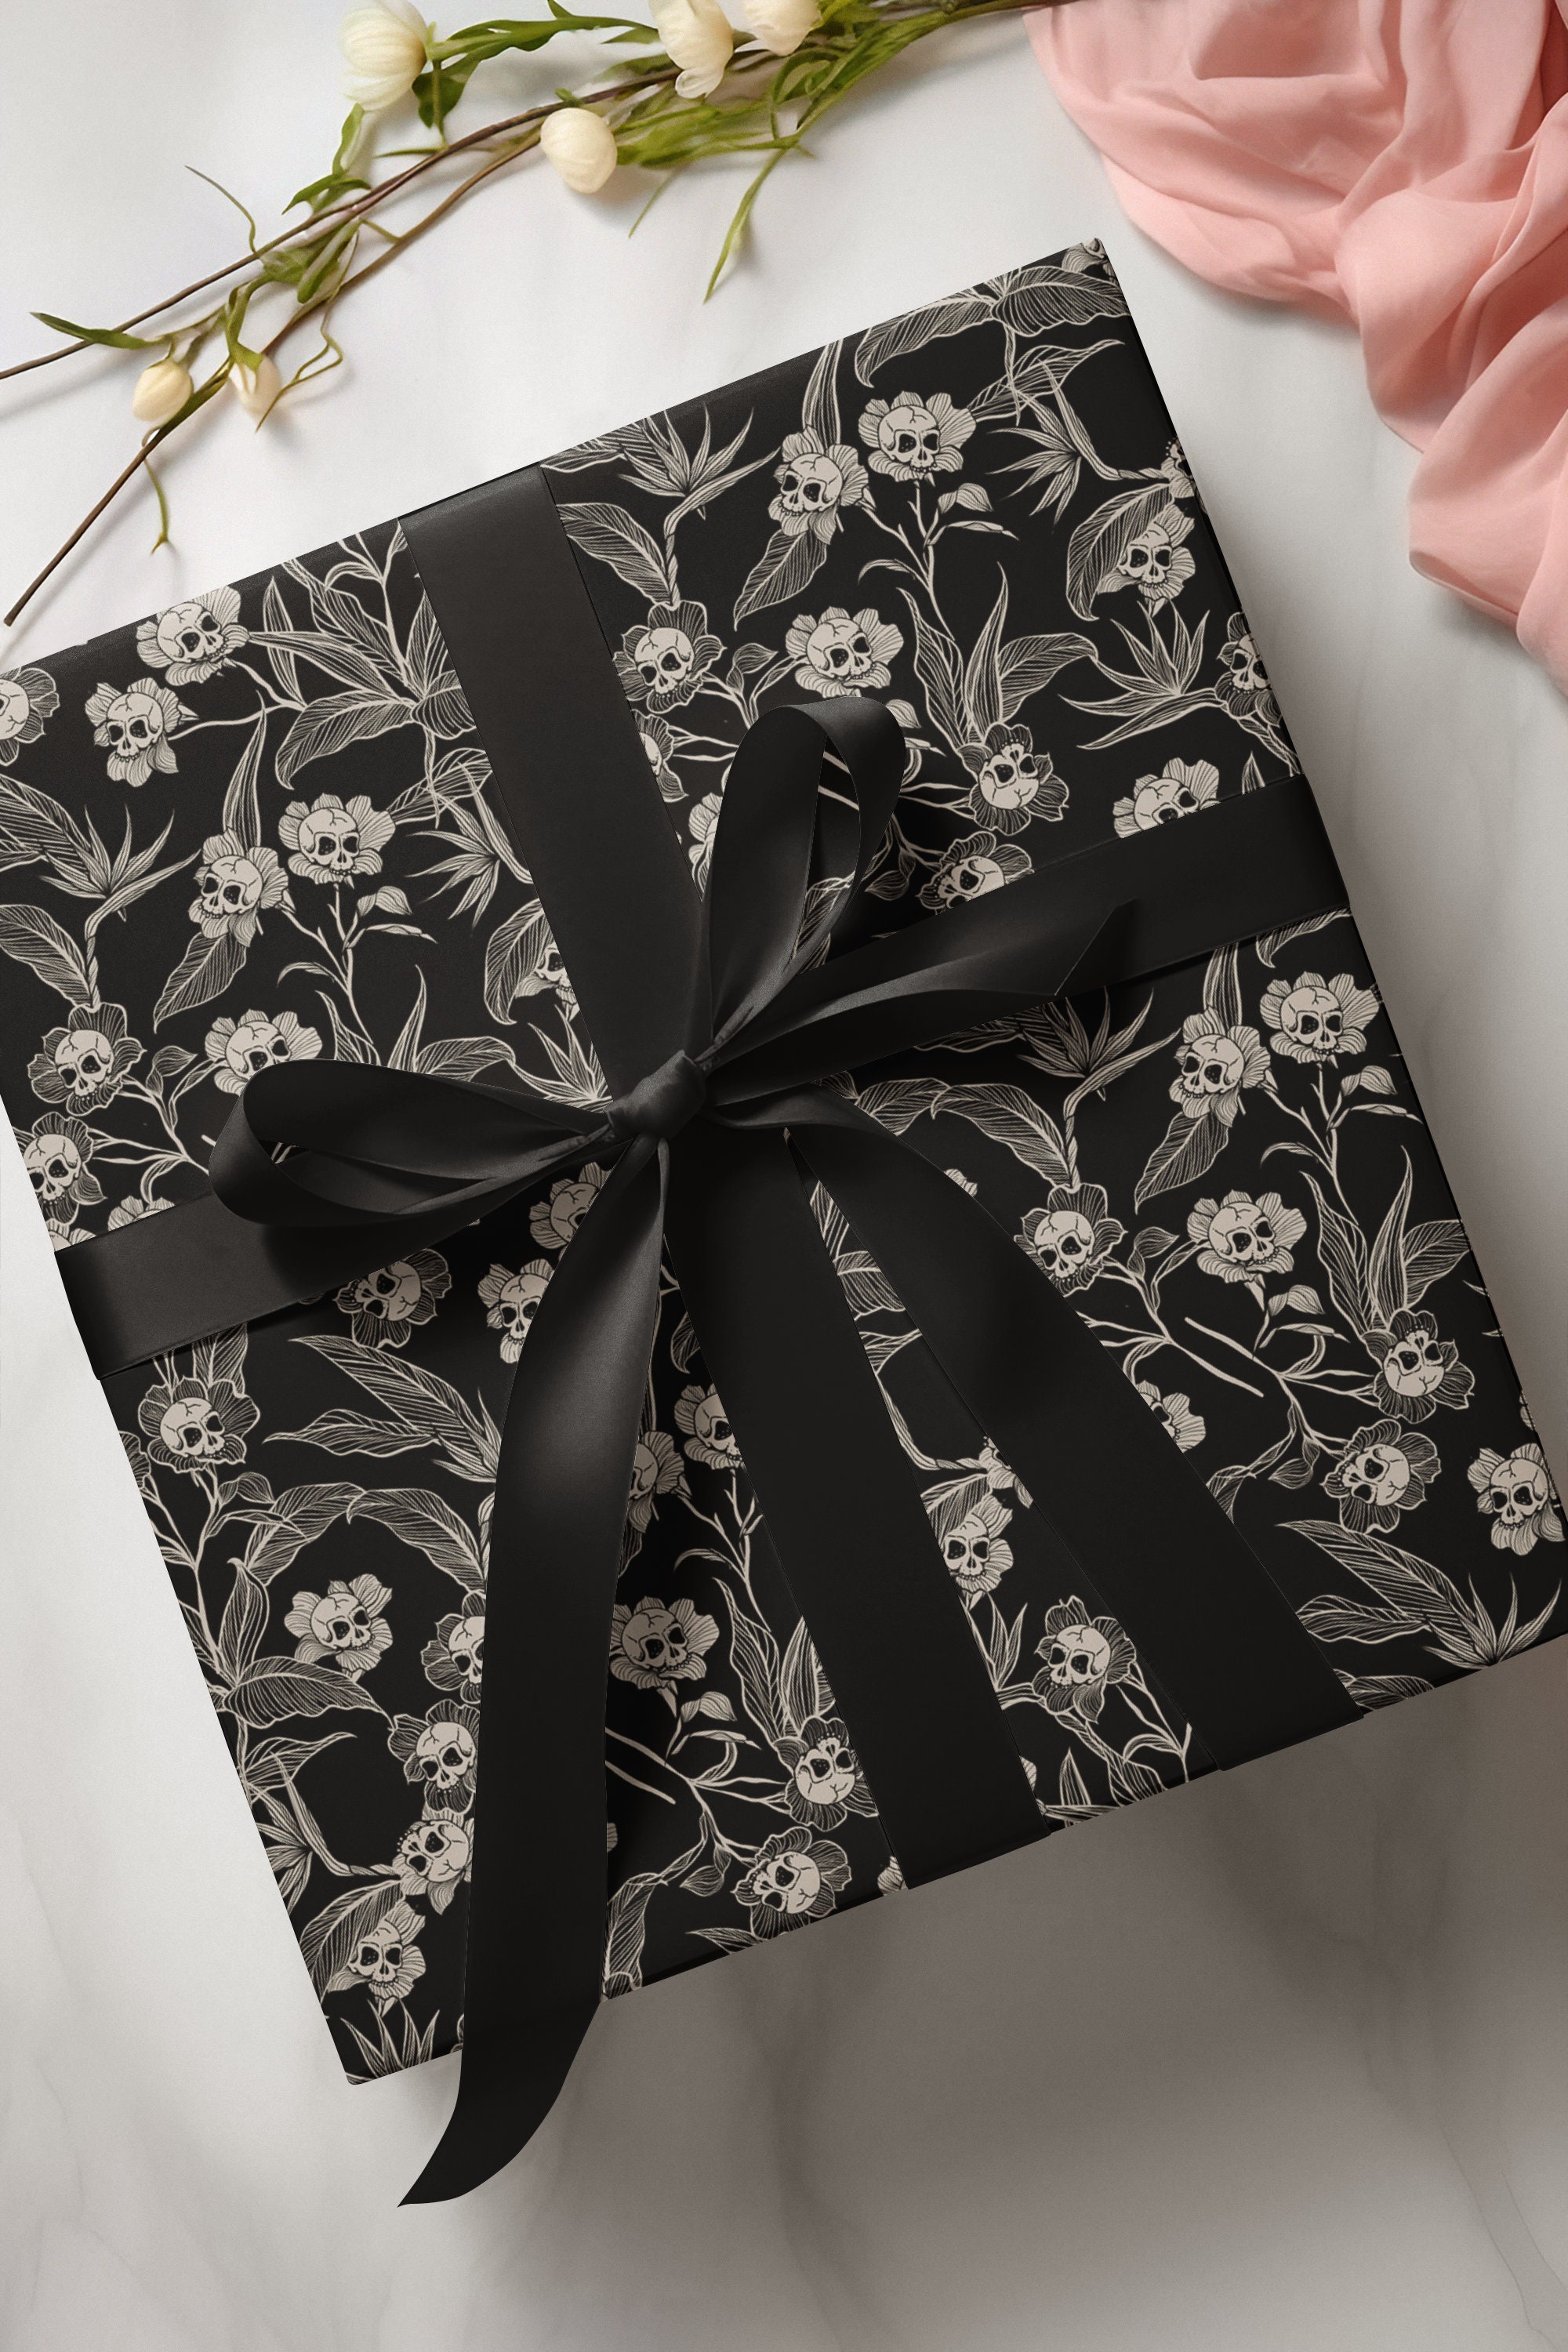 Spooky Gift Wrap Pack, Black, White and Red Halloween Wrapping Paper Sheets  W/ Watercolor Skulls, Goth Spider Webs, and Witchy Botanicals 